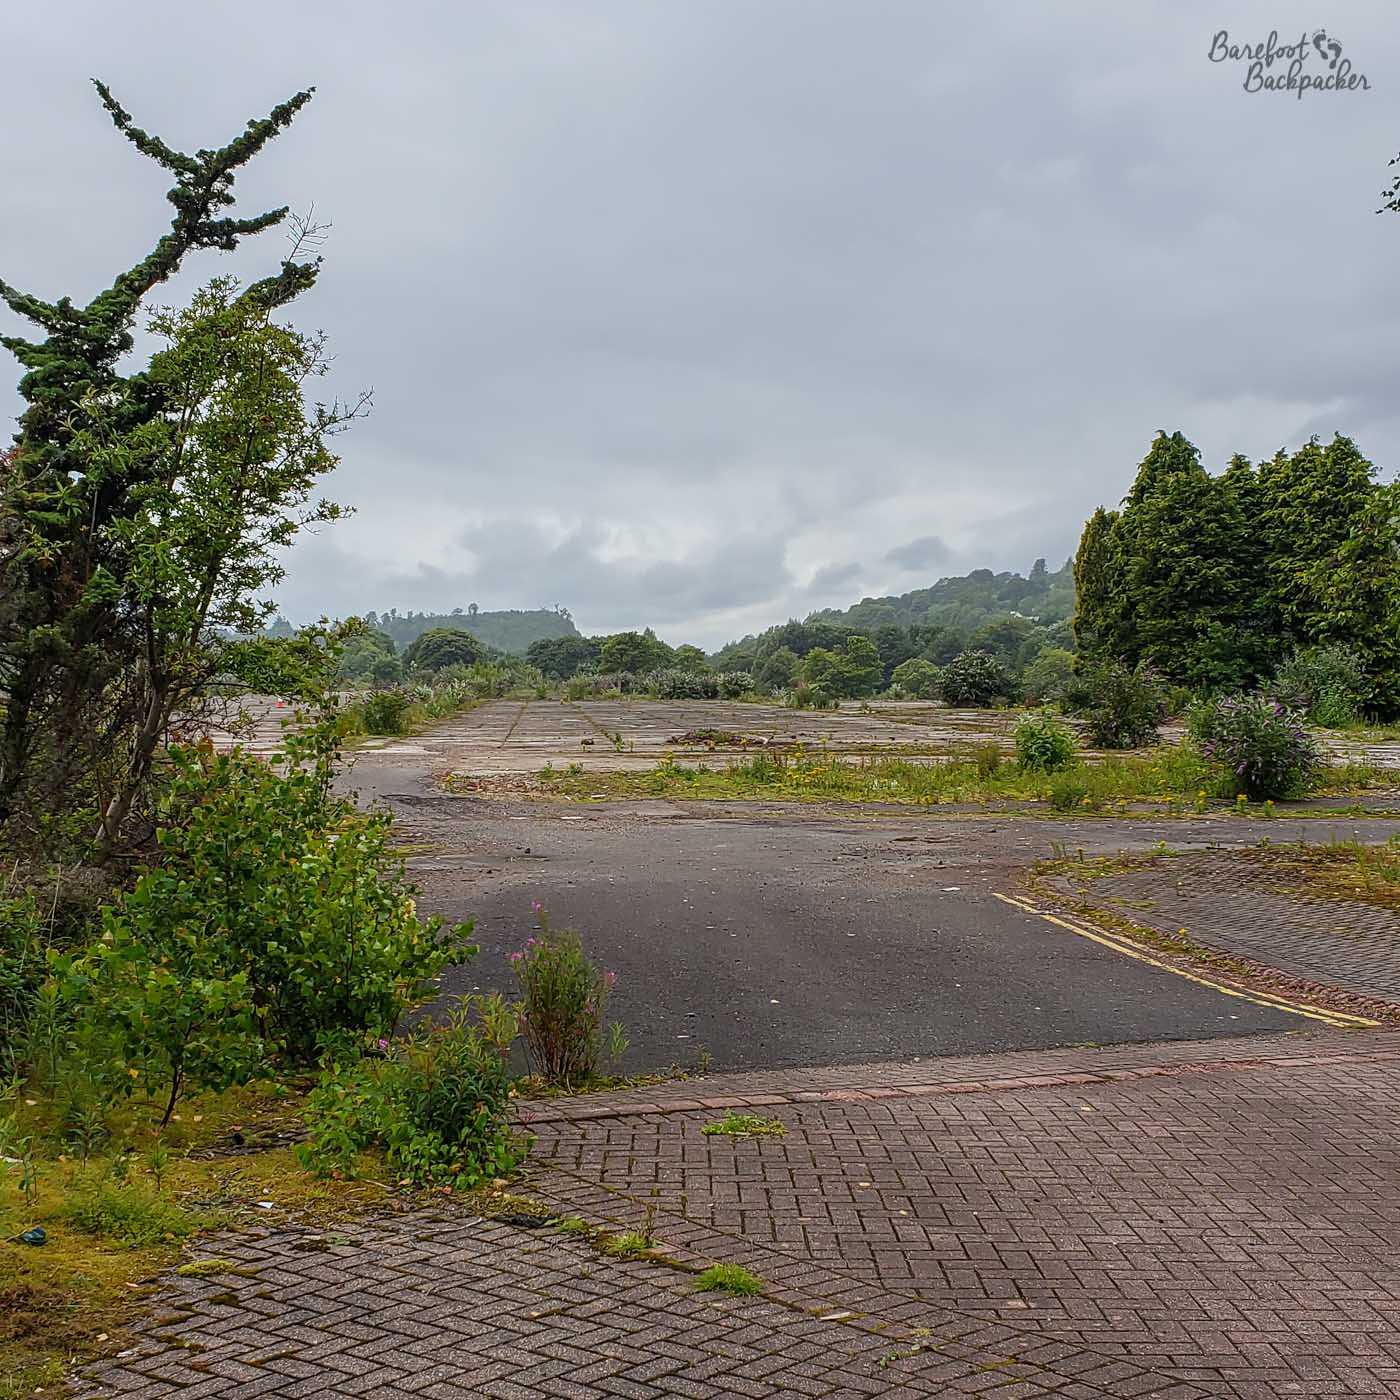 Another wide open space lined with concrete that used to be a building. The road leading to it can clearly be seen, and the site itself has shrubs around the edge marking where the walls used to be.